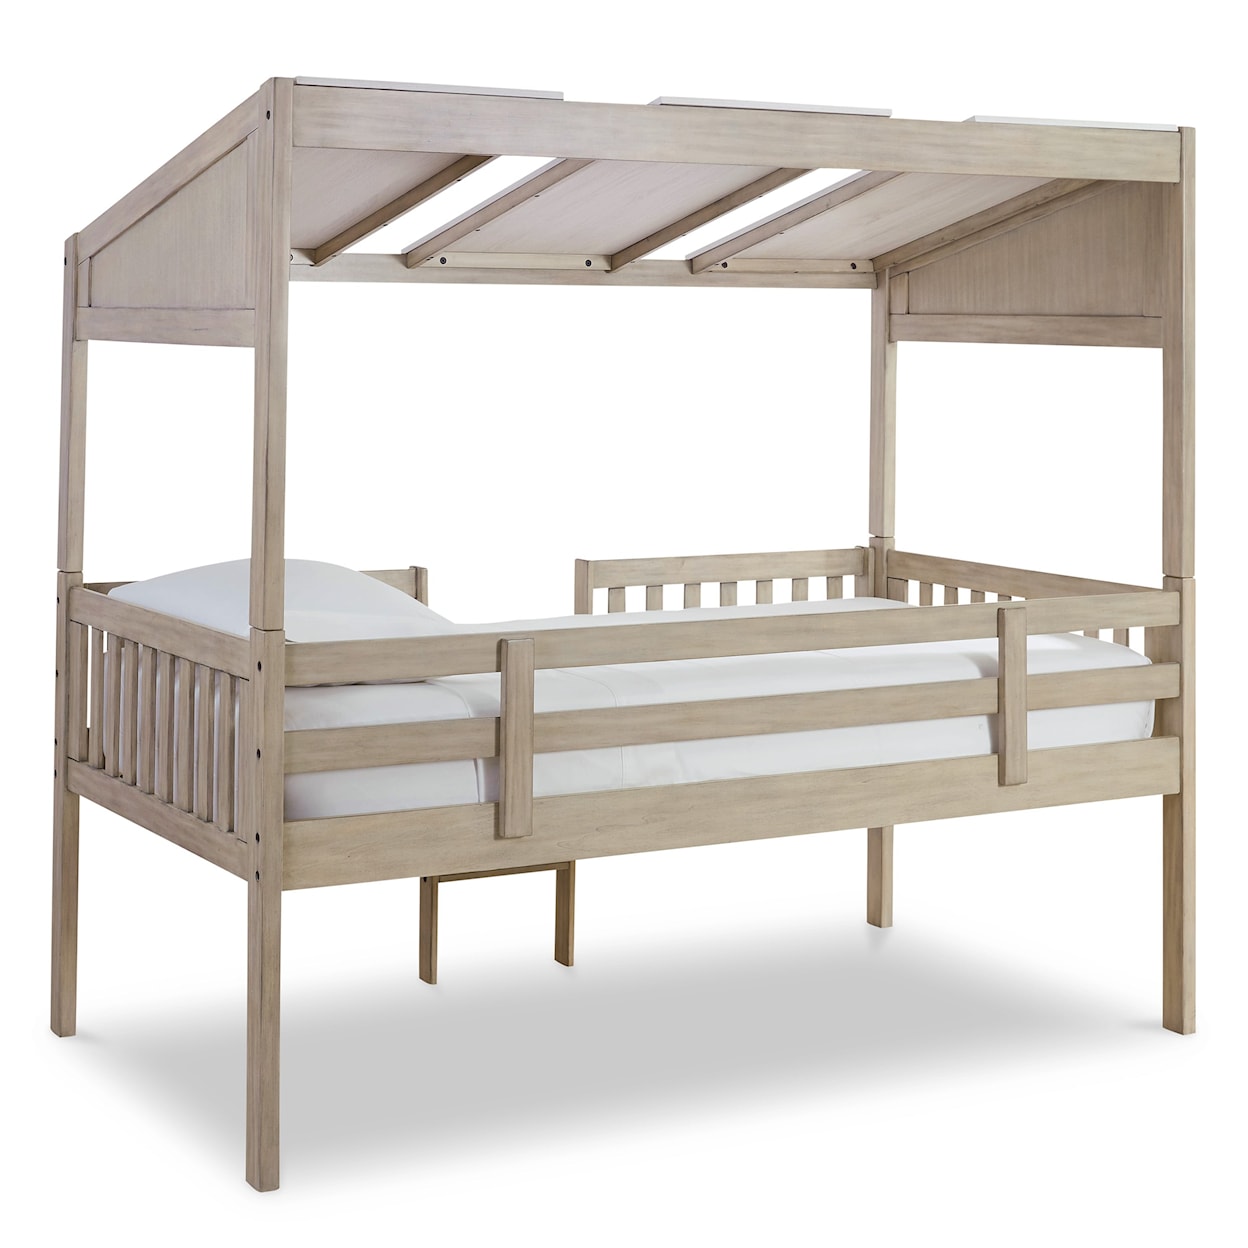 Ashley Signature Design Wrenalyn Twin Loft Bed with Roof